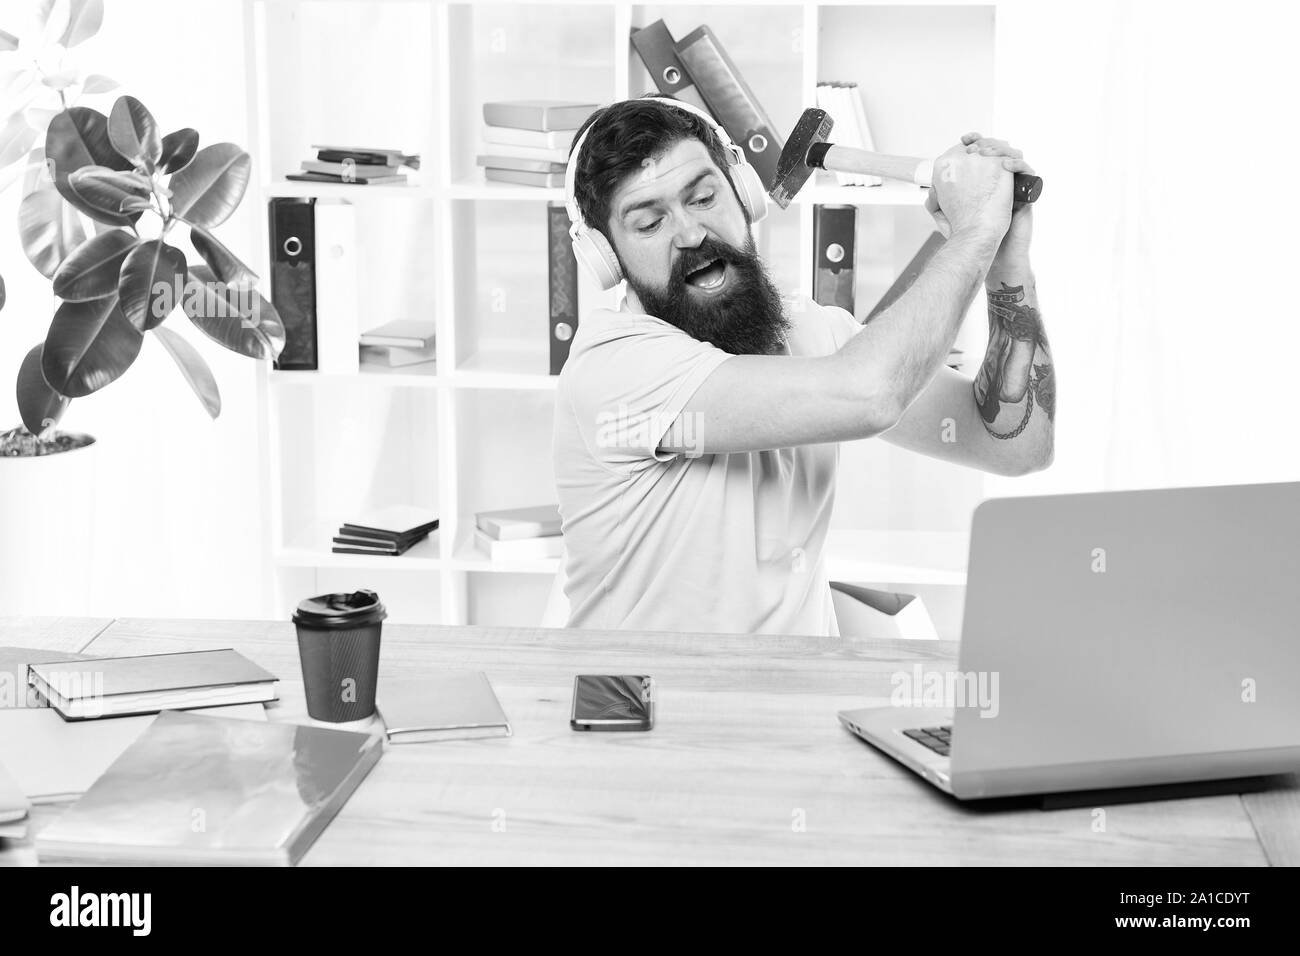 Slow internet connection. Outdated software. Computer lag. Reasons for computer lagging. How fix slow lagging system. Hate office routine. Man bearded guy headphones office swing hammer on computer. Stock Photo